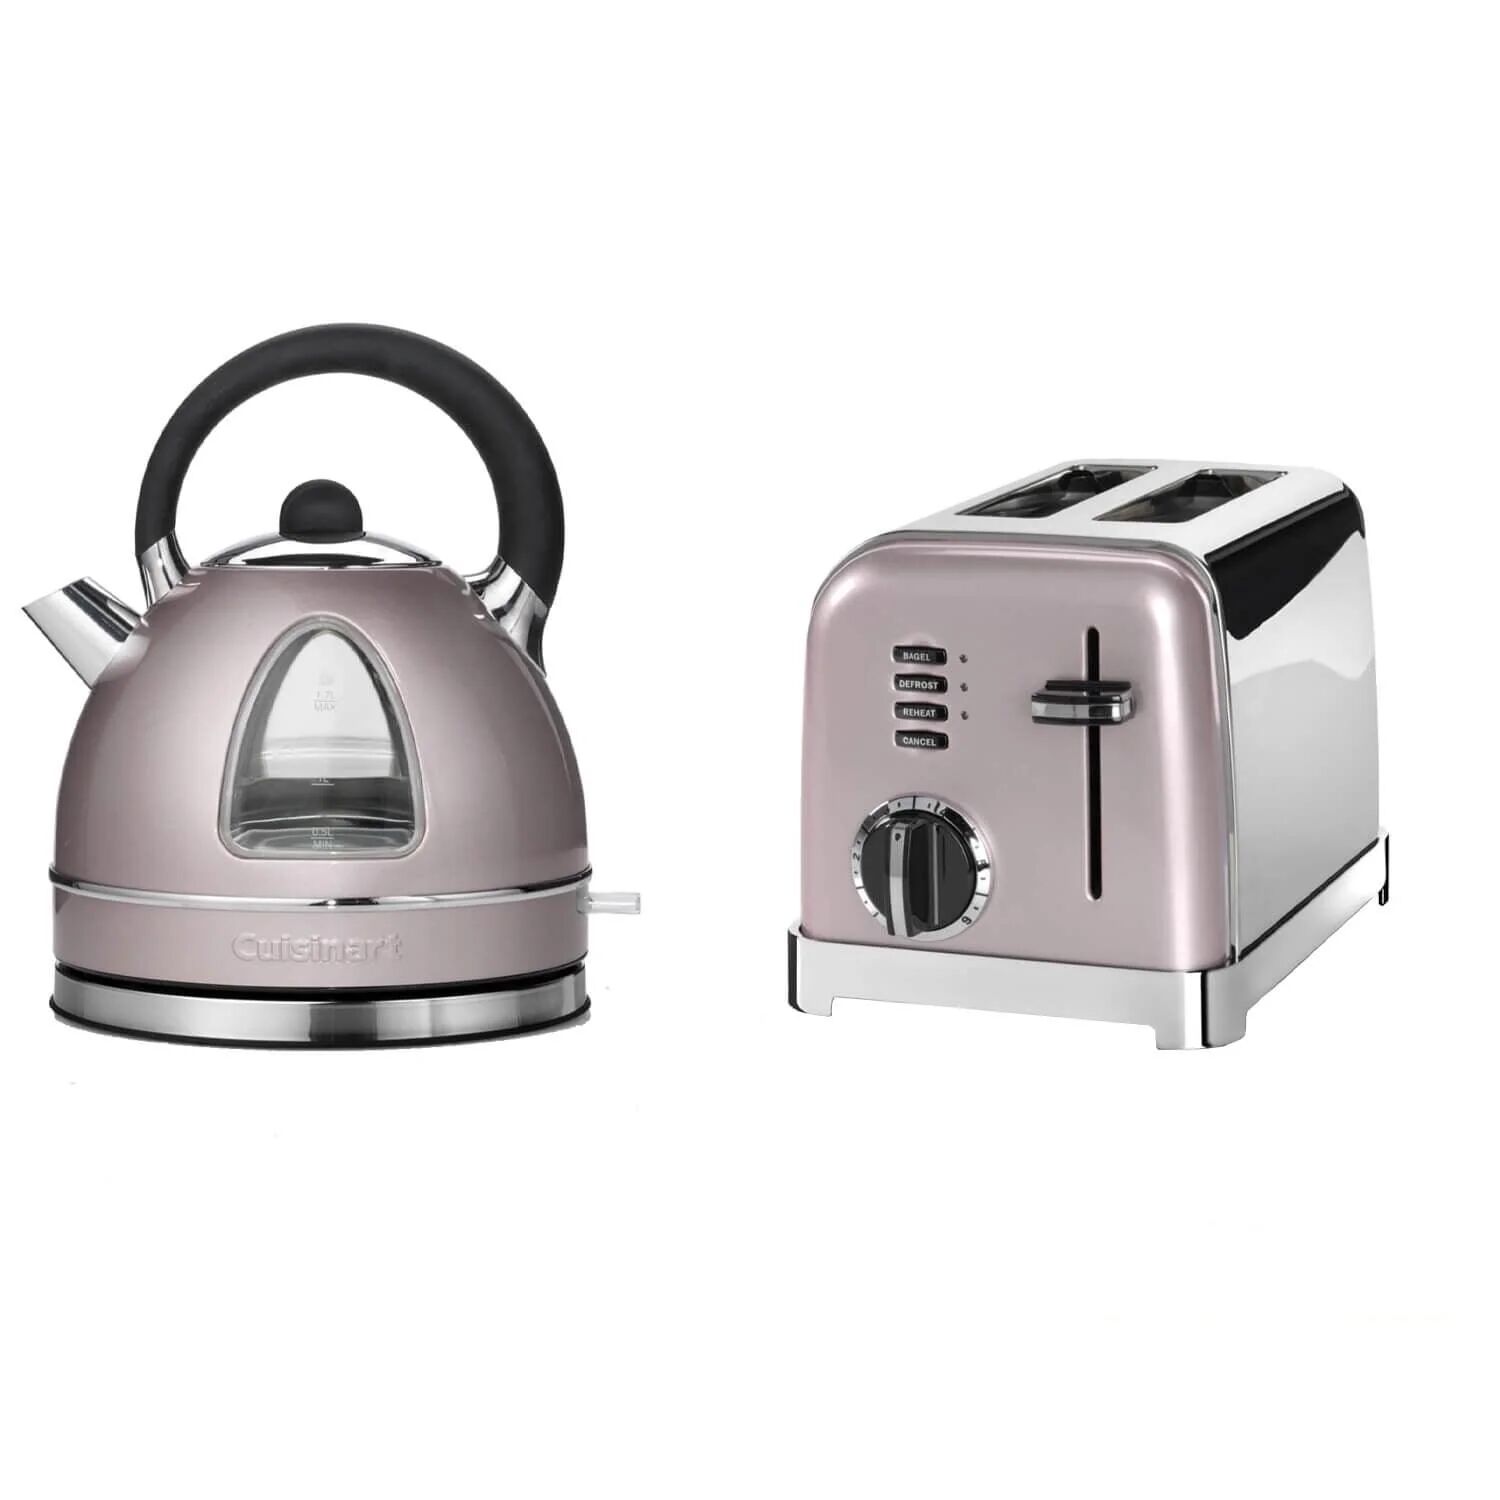 Cuisinart Style Collection Traditional Dome Kettle & 2 Slice Toaster Set - Vintage Rose